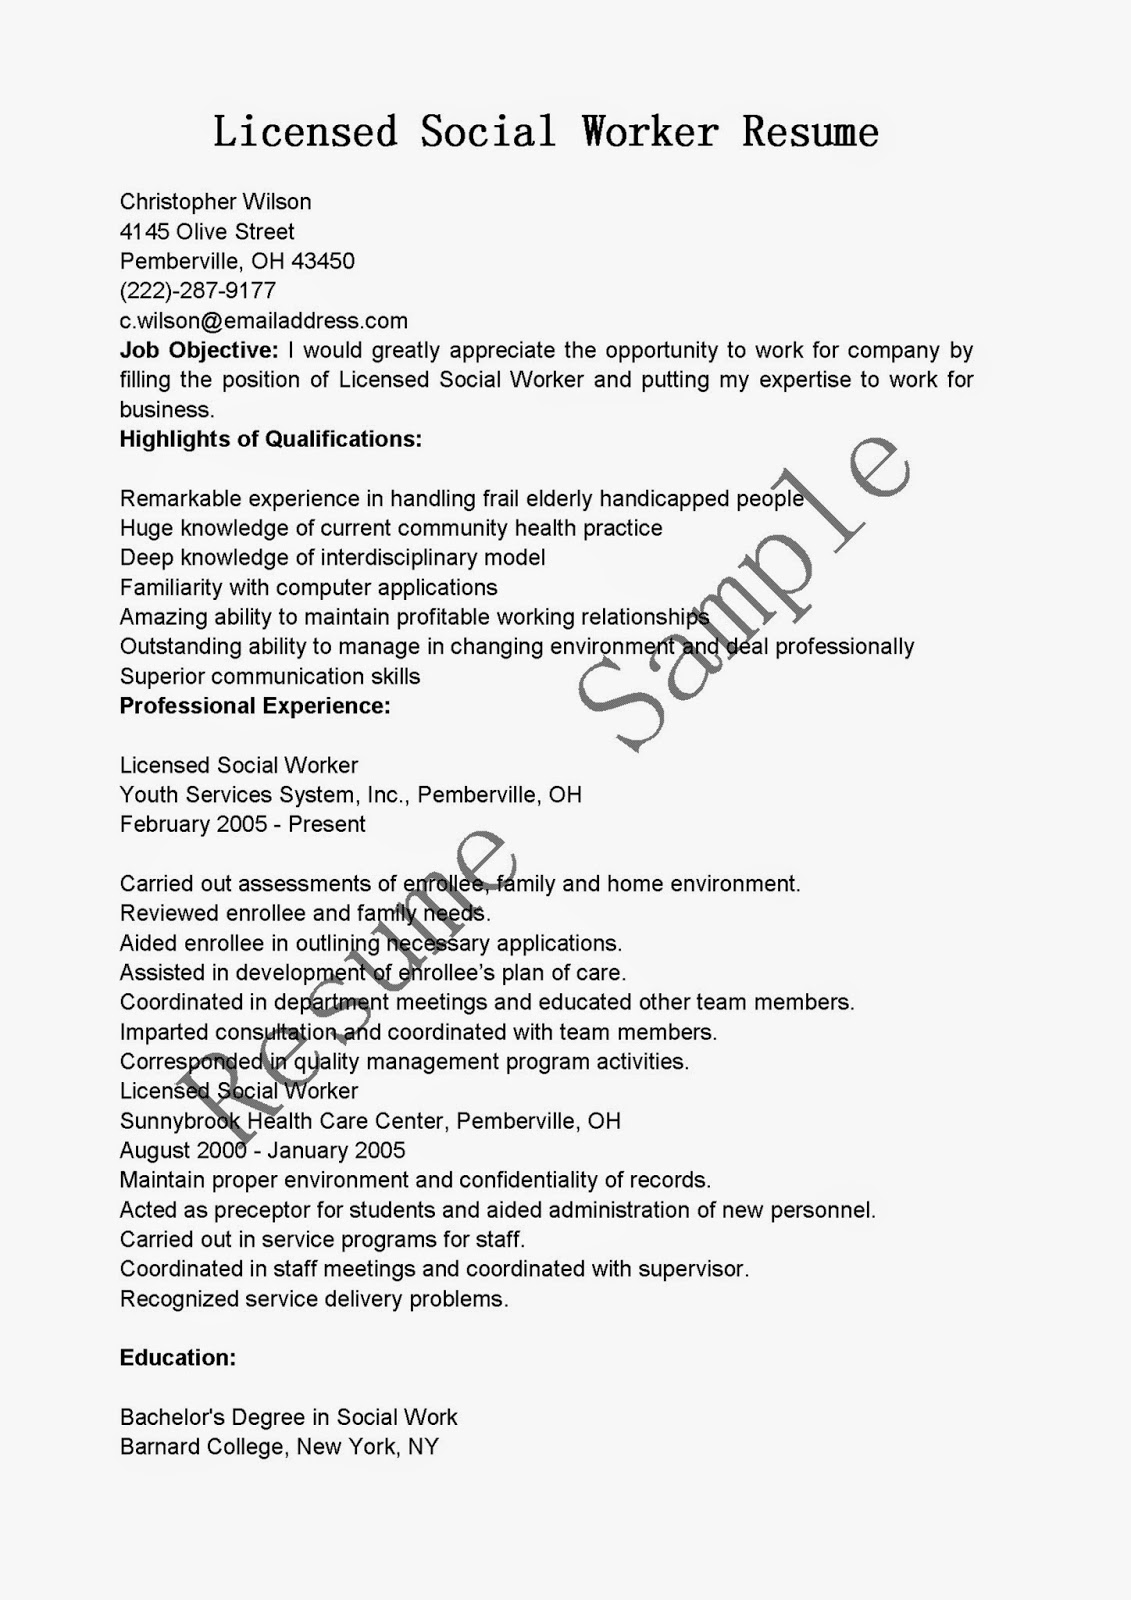 Resume designed by factory workers